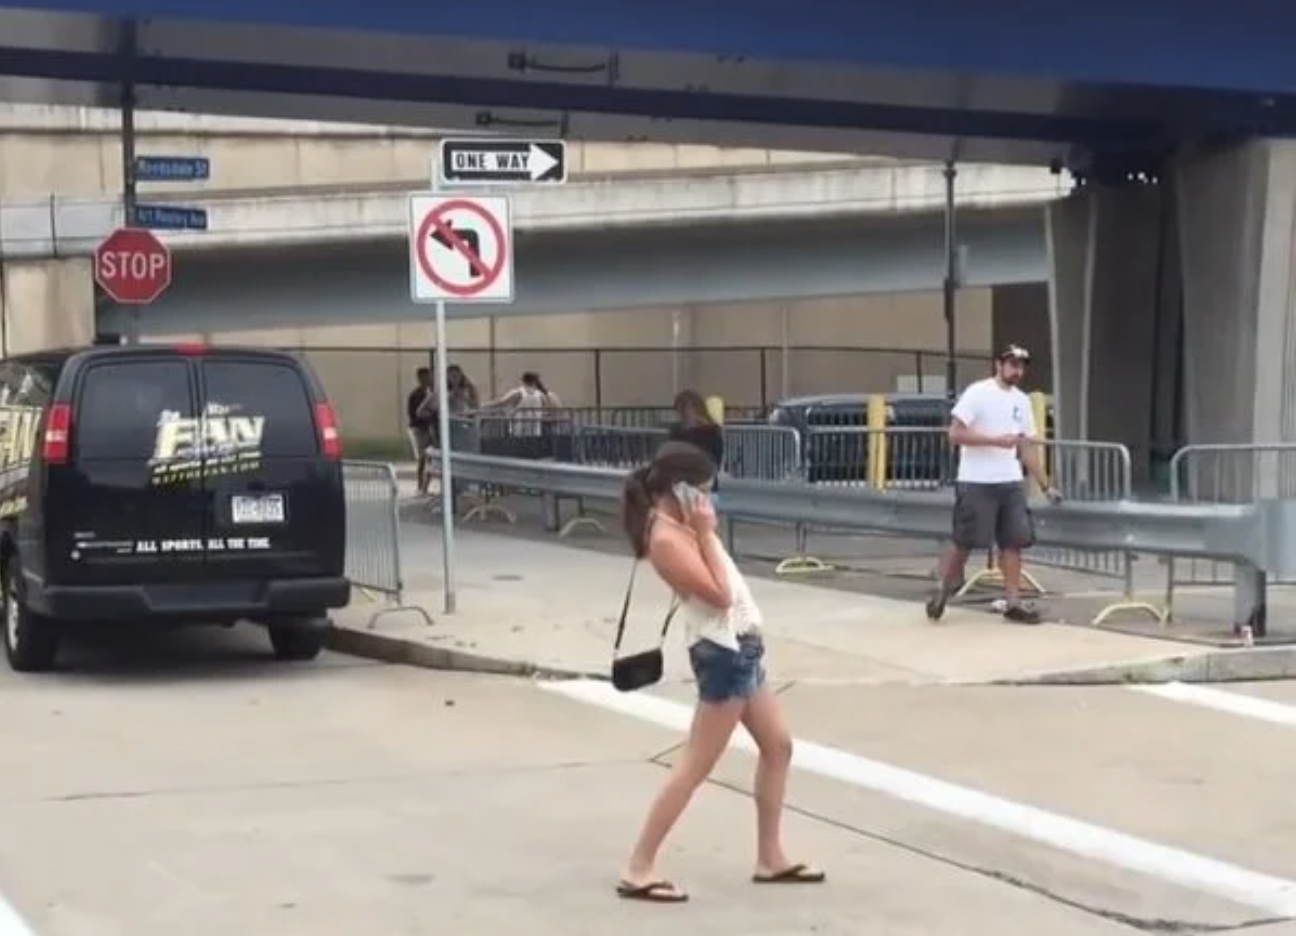 Meanwhile at Lollapalooza: Hilarious Drunk Girl Set to ‘Smooth Criminal’ Is Our #MarryMe of the Week